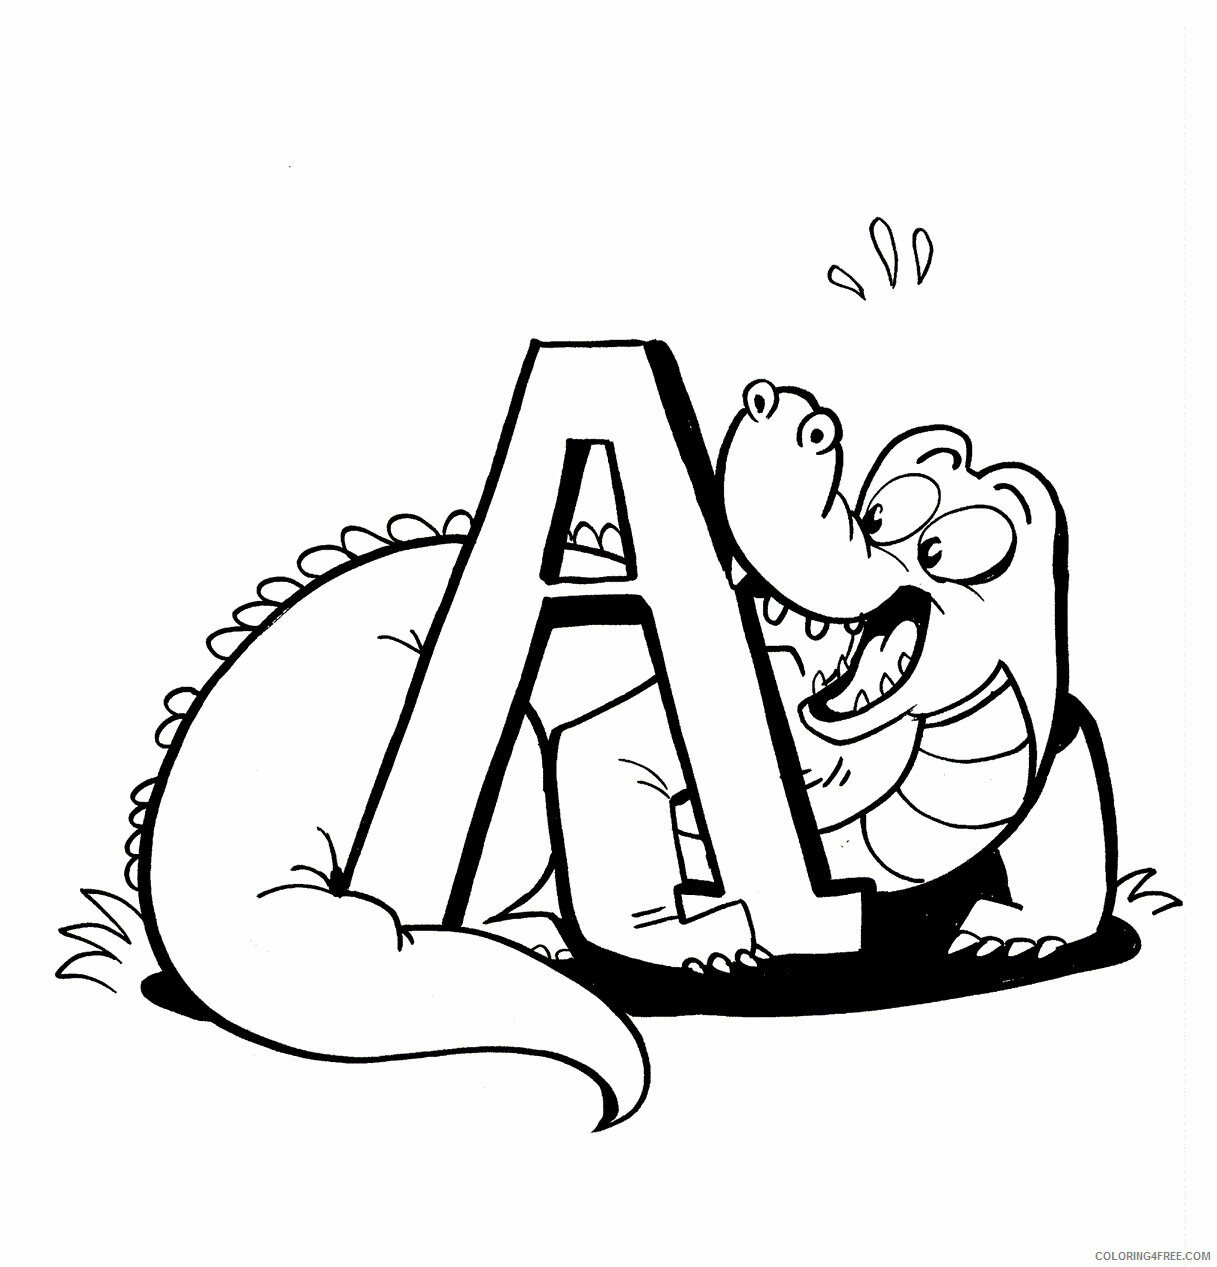 Alligator Coloring Pages Animal Printable Sheets Alligator 2021 0056 Coloring4free